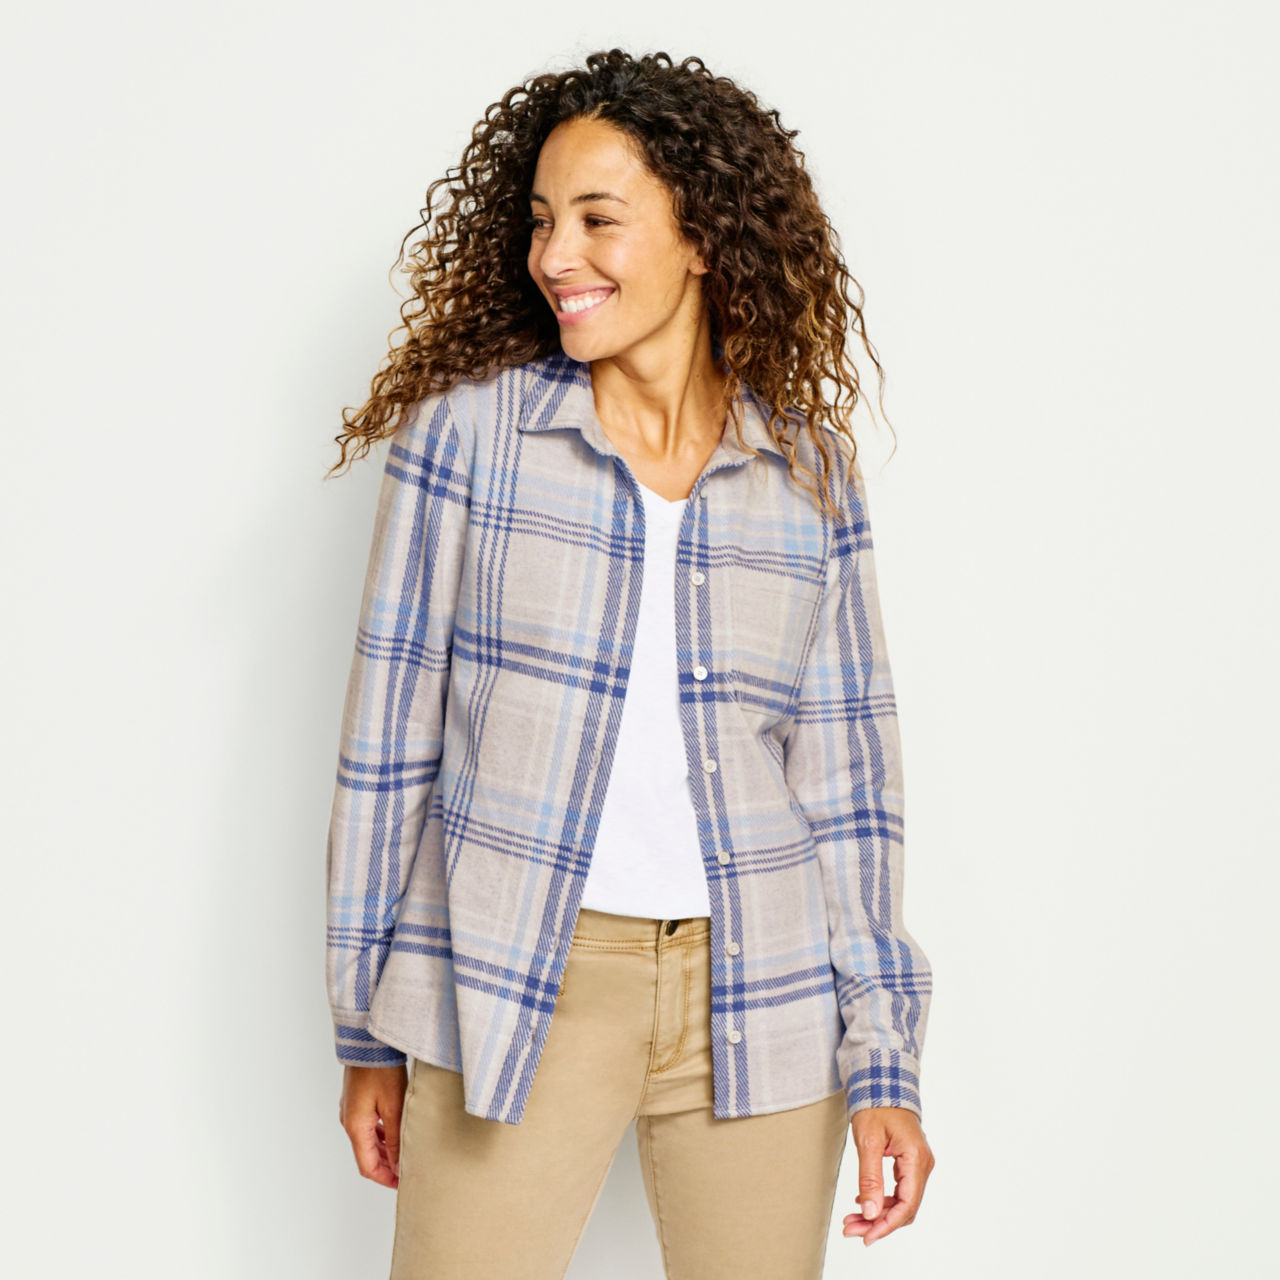 Snowy River Brushed Knit Long-Sleeved Shirt | Orvis